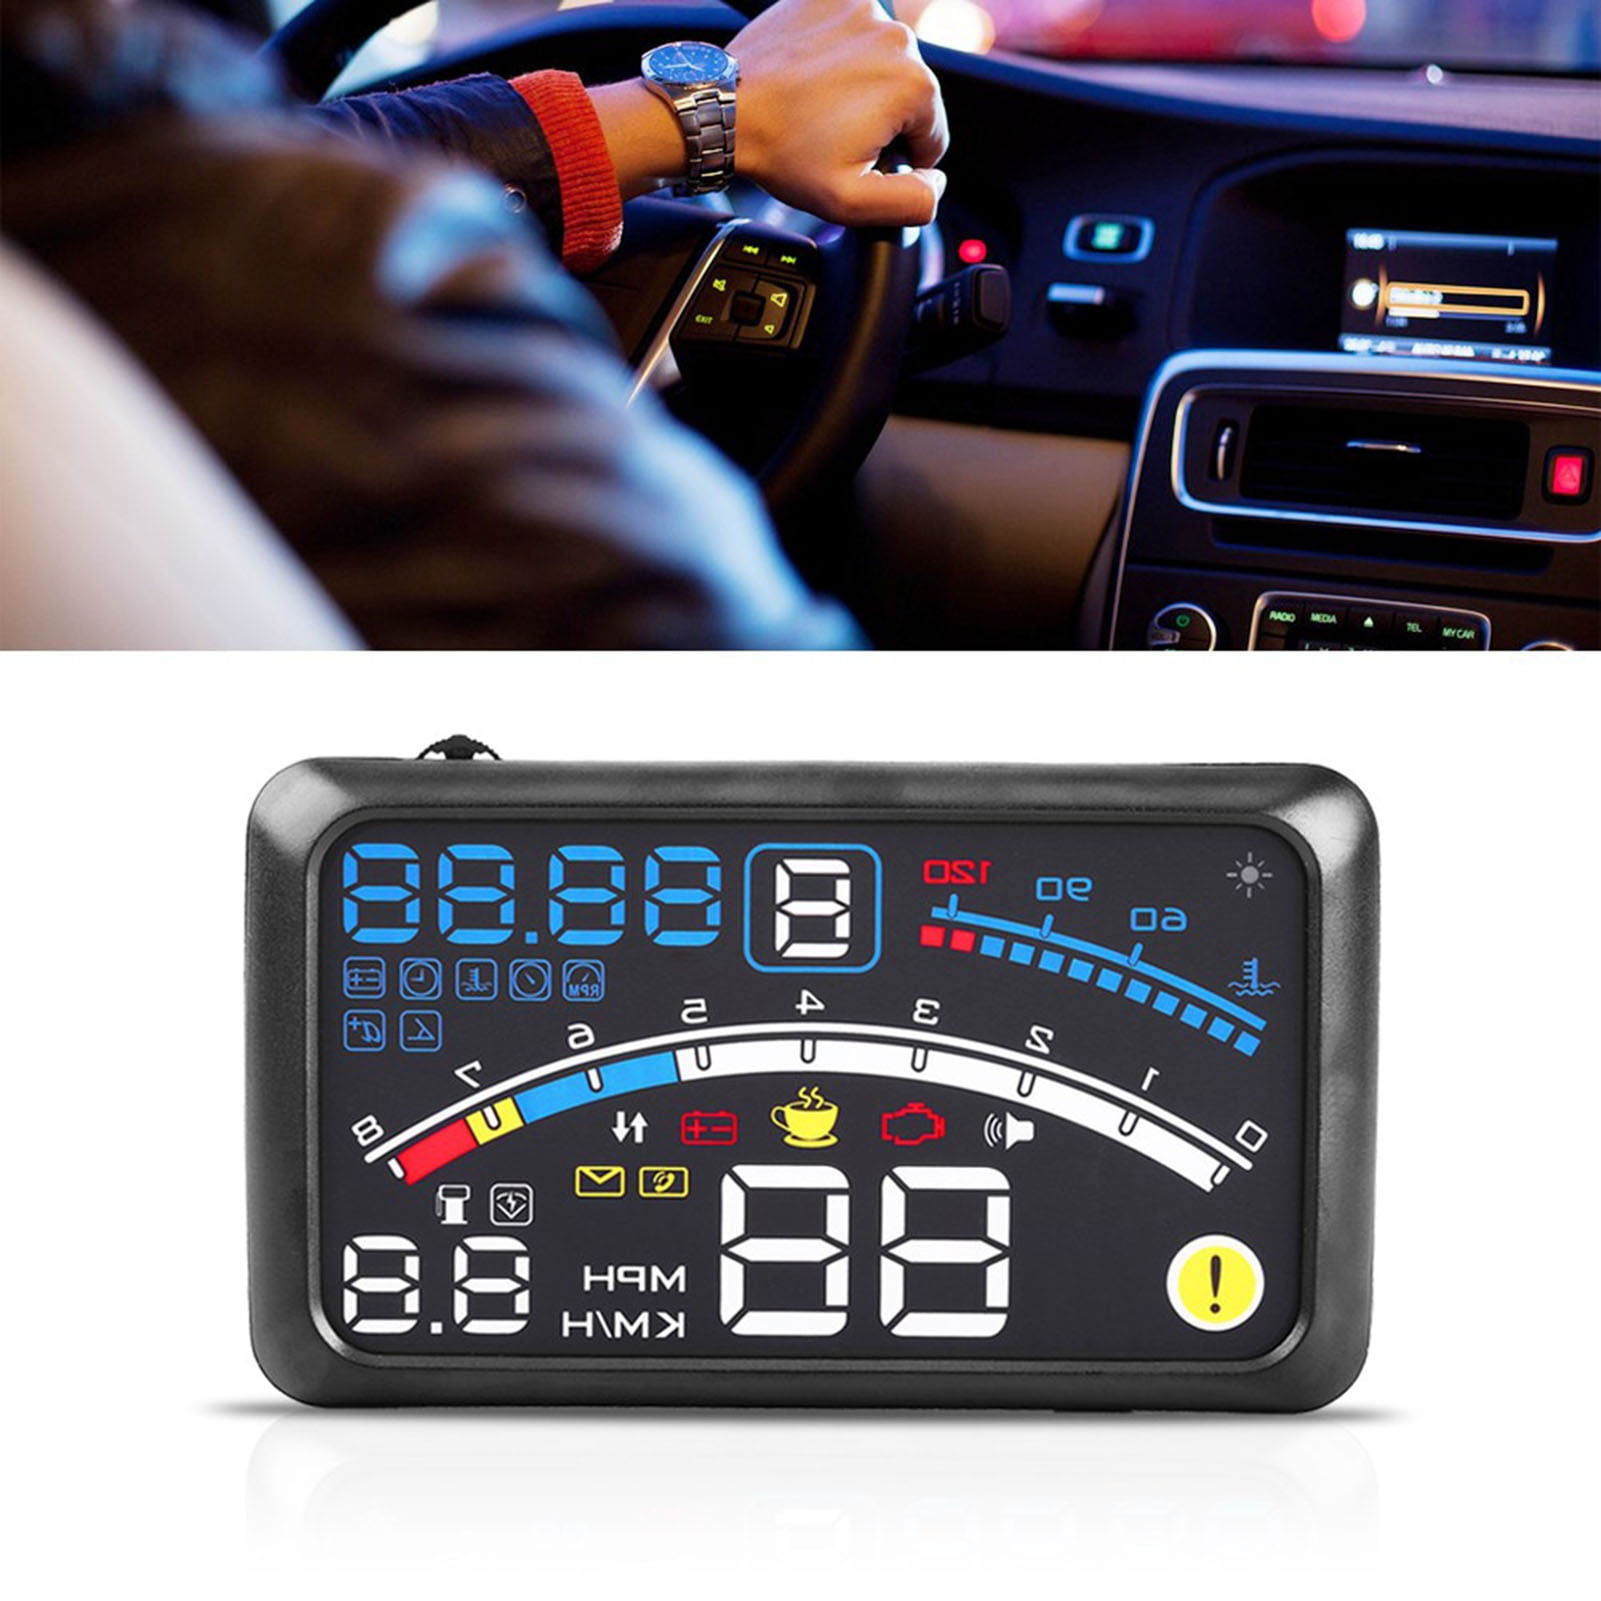 Smart HUD Display, 5.5-Inch Universal GPS Head Up Display with Displays  Speed, Altitude, Driving Time, Date, Clock and More Multicolor